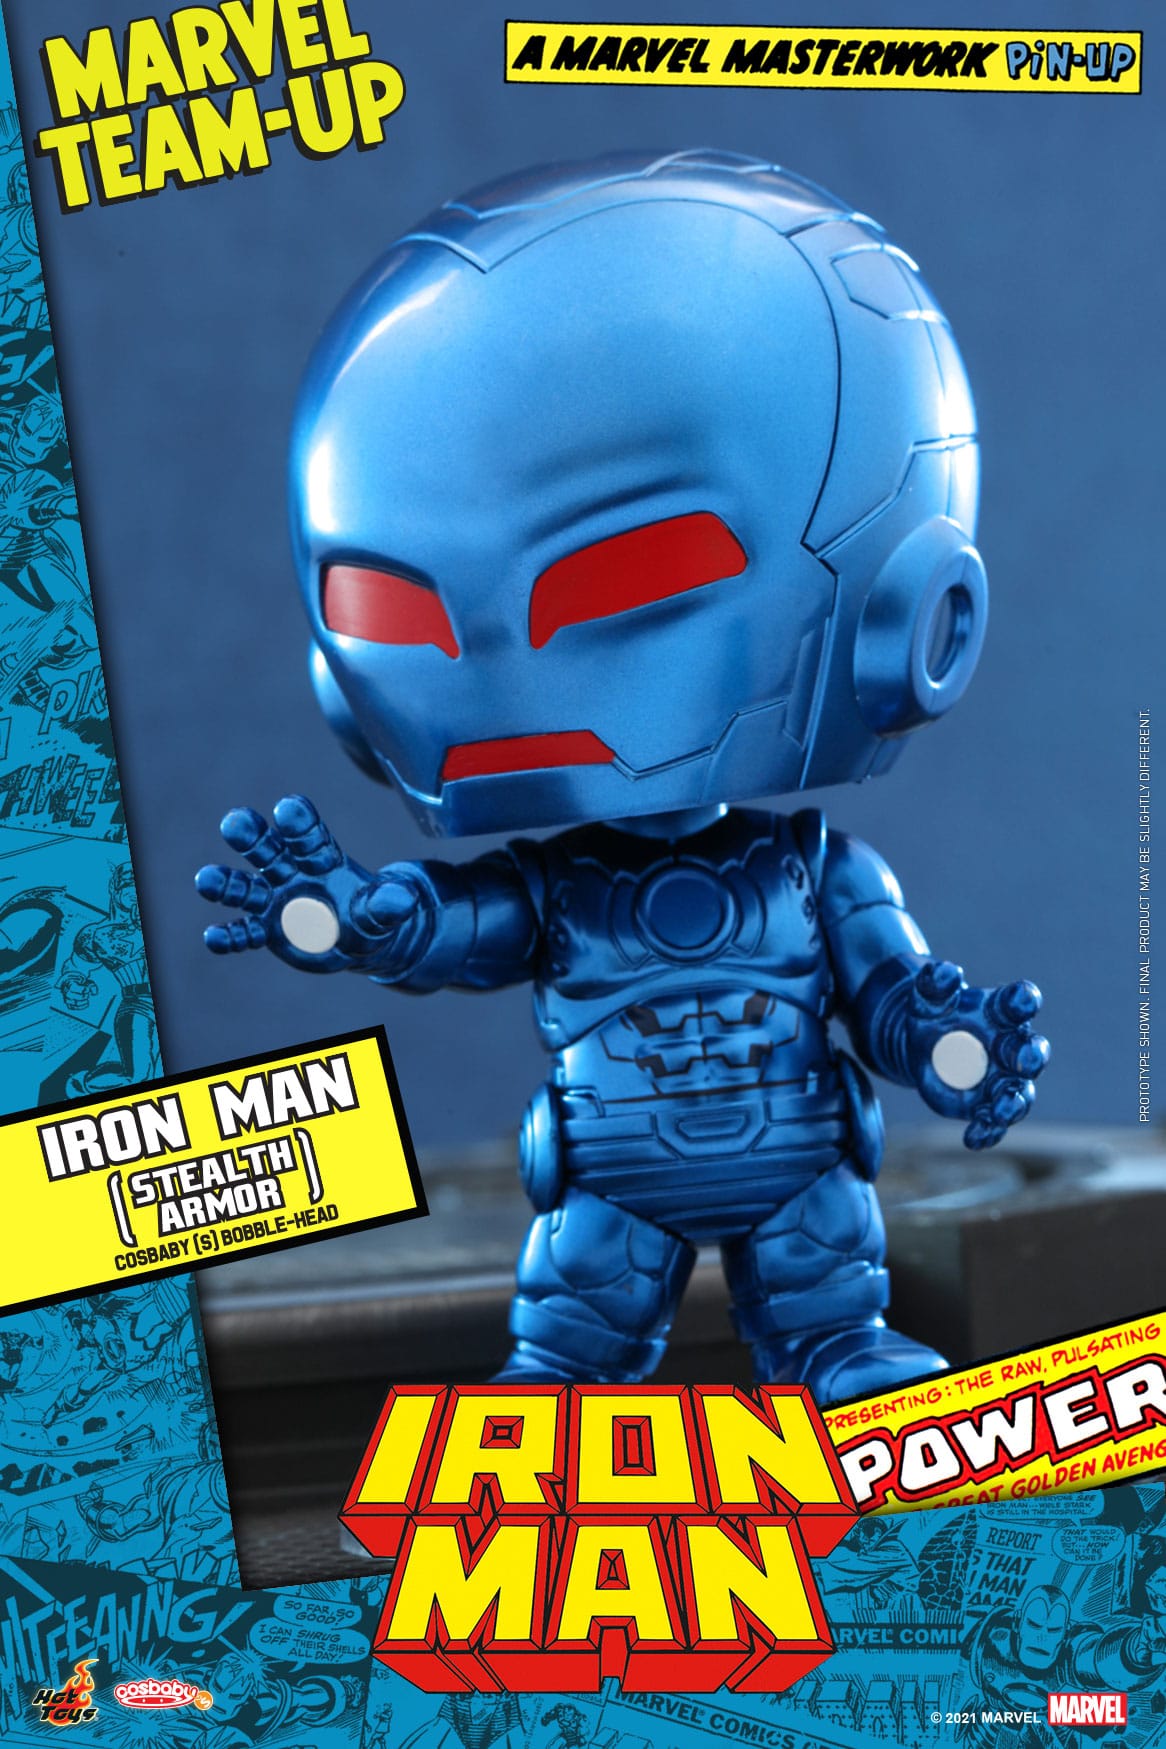 Iron Man (Stealth Armor) Cosbaby